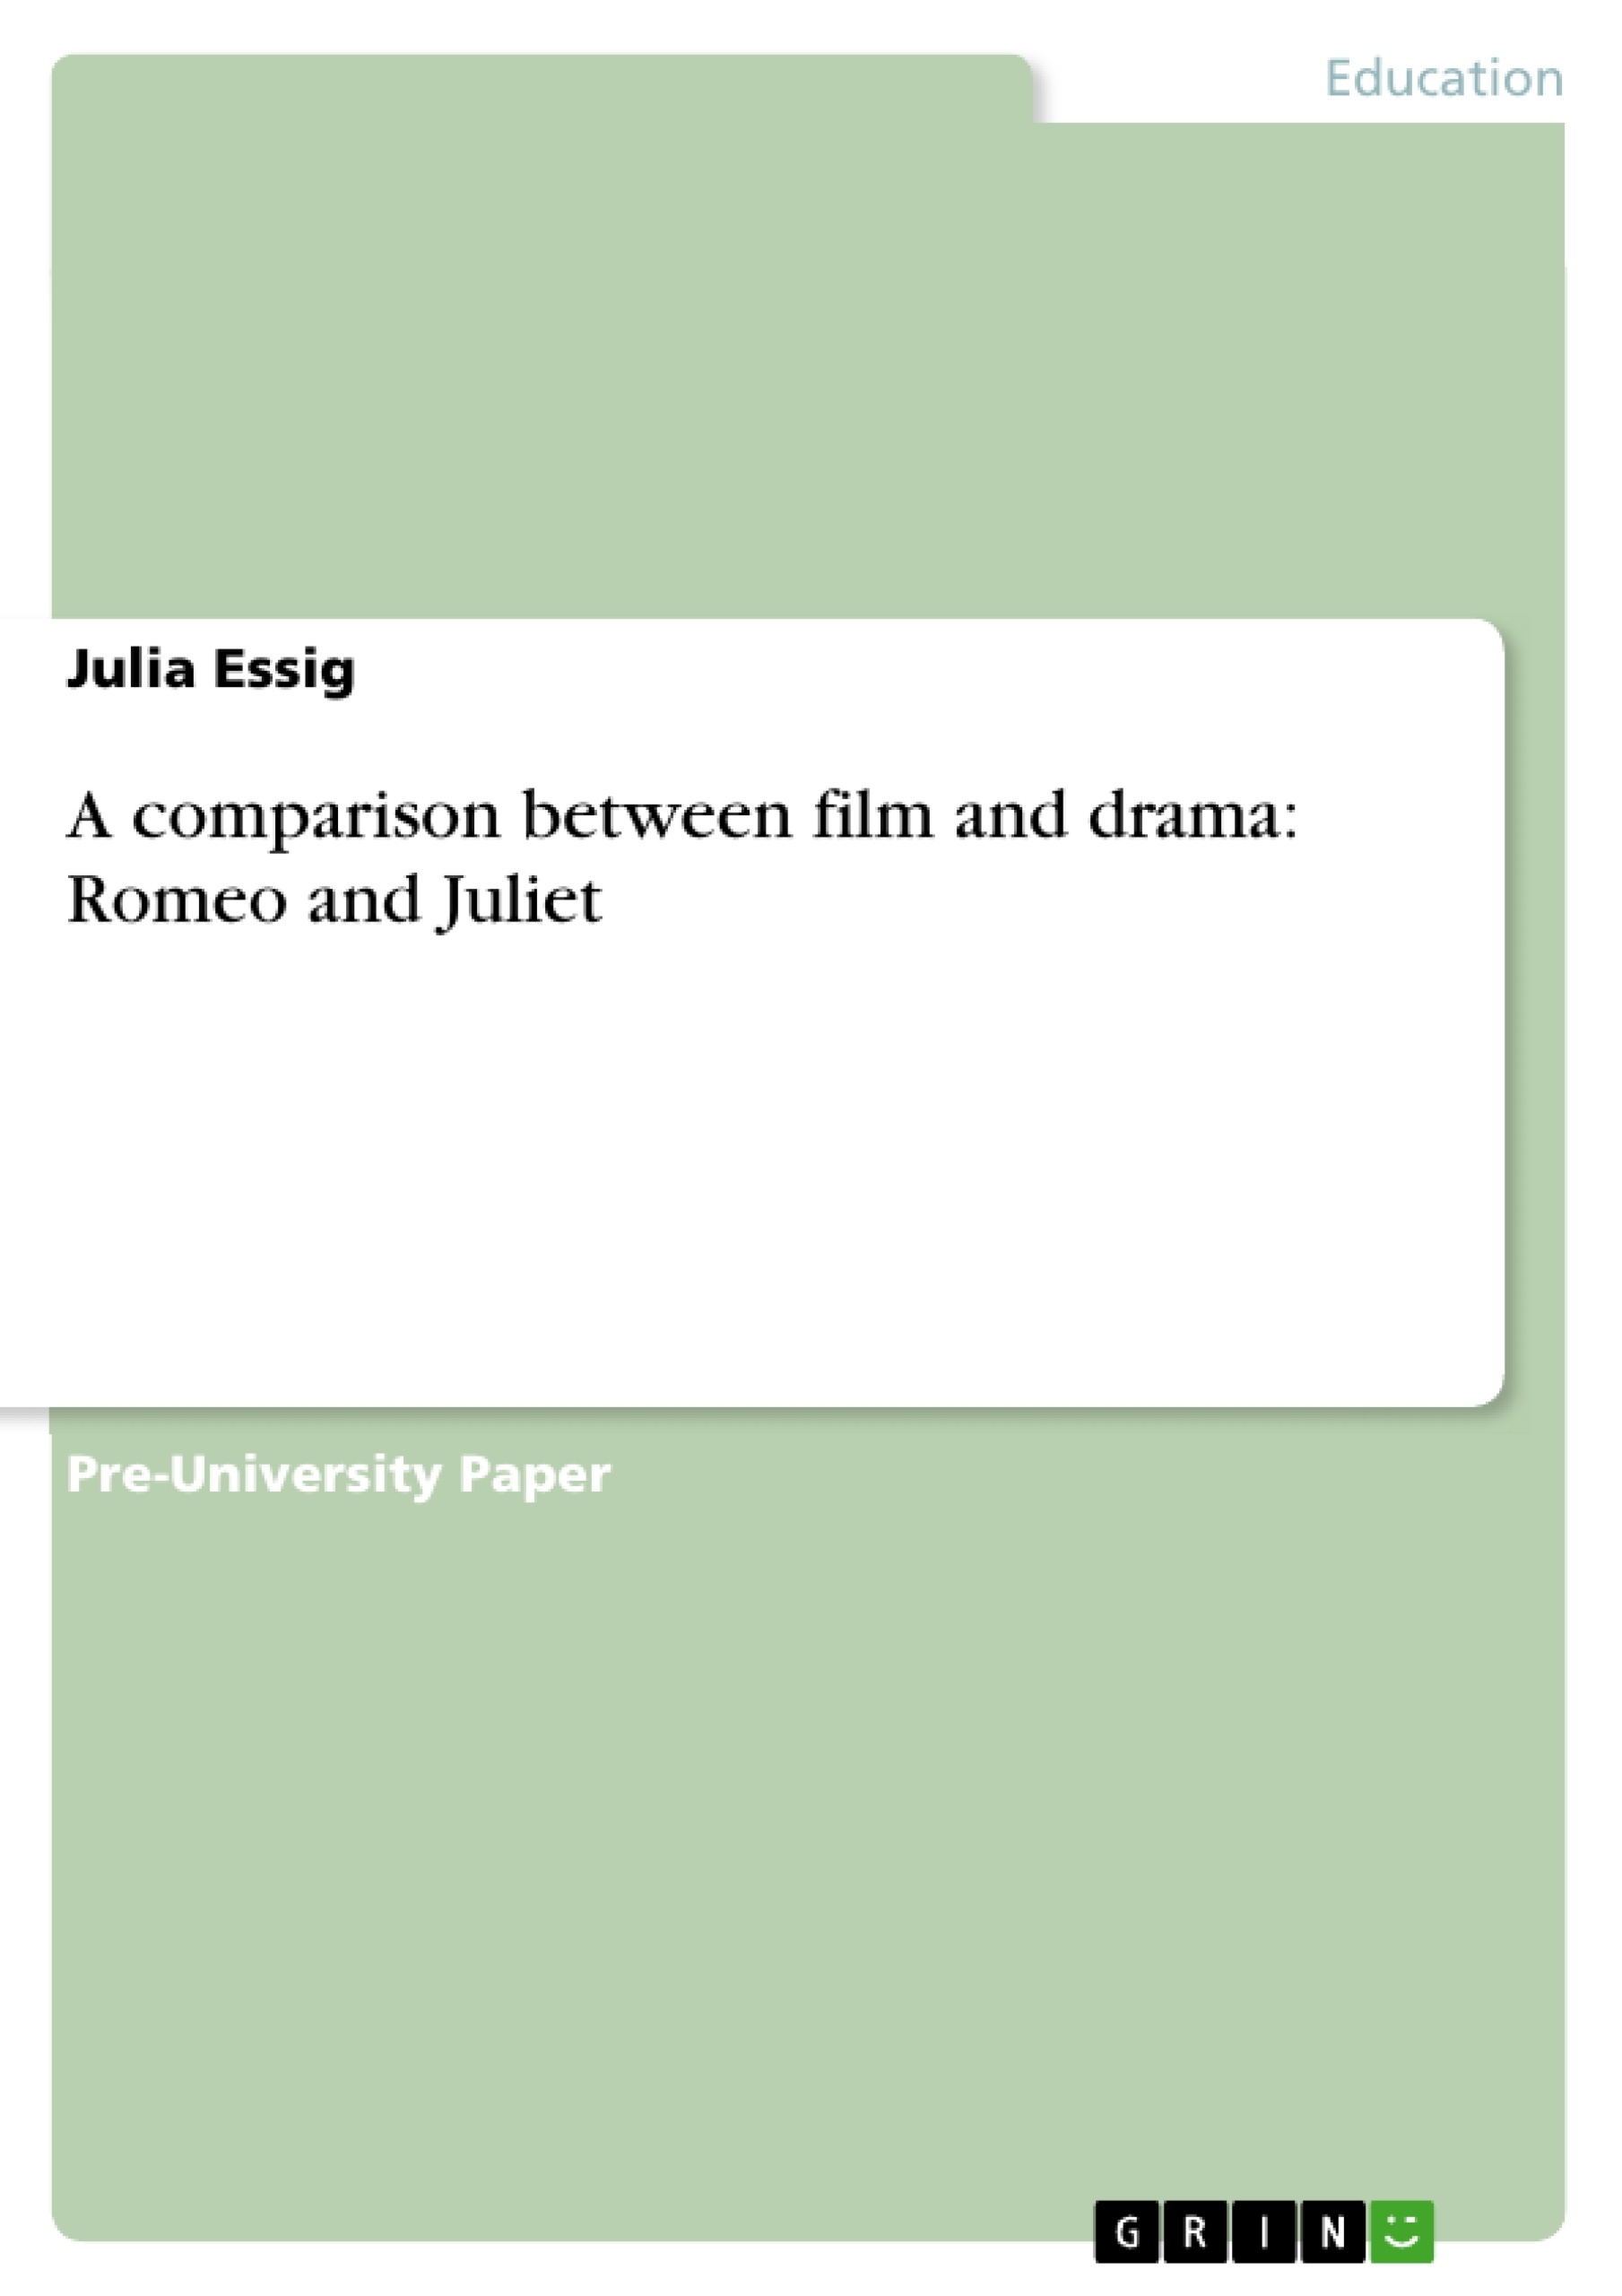 Title: A comparison between film and drama: Romeo and Juliet